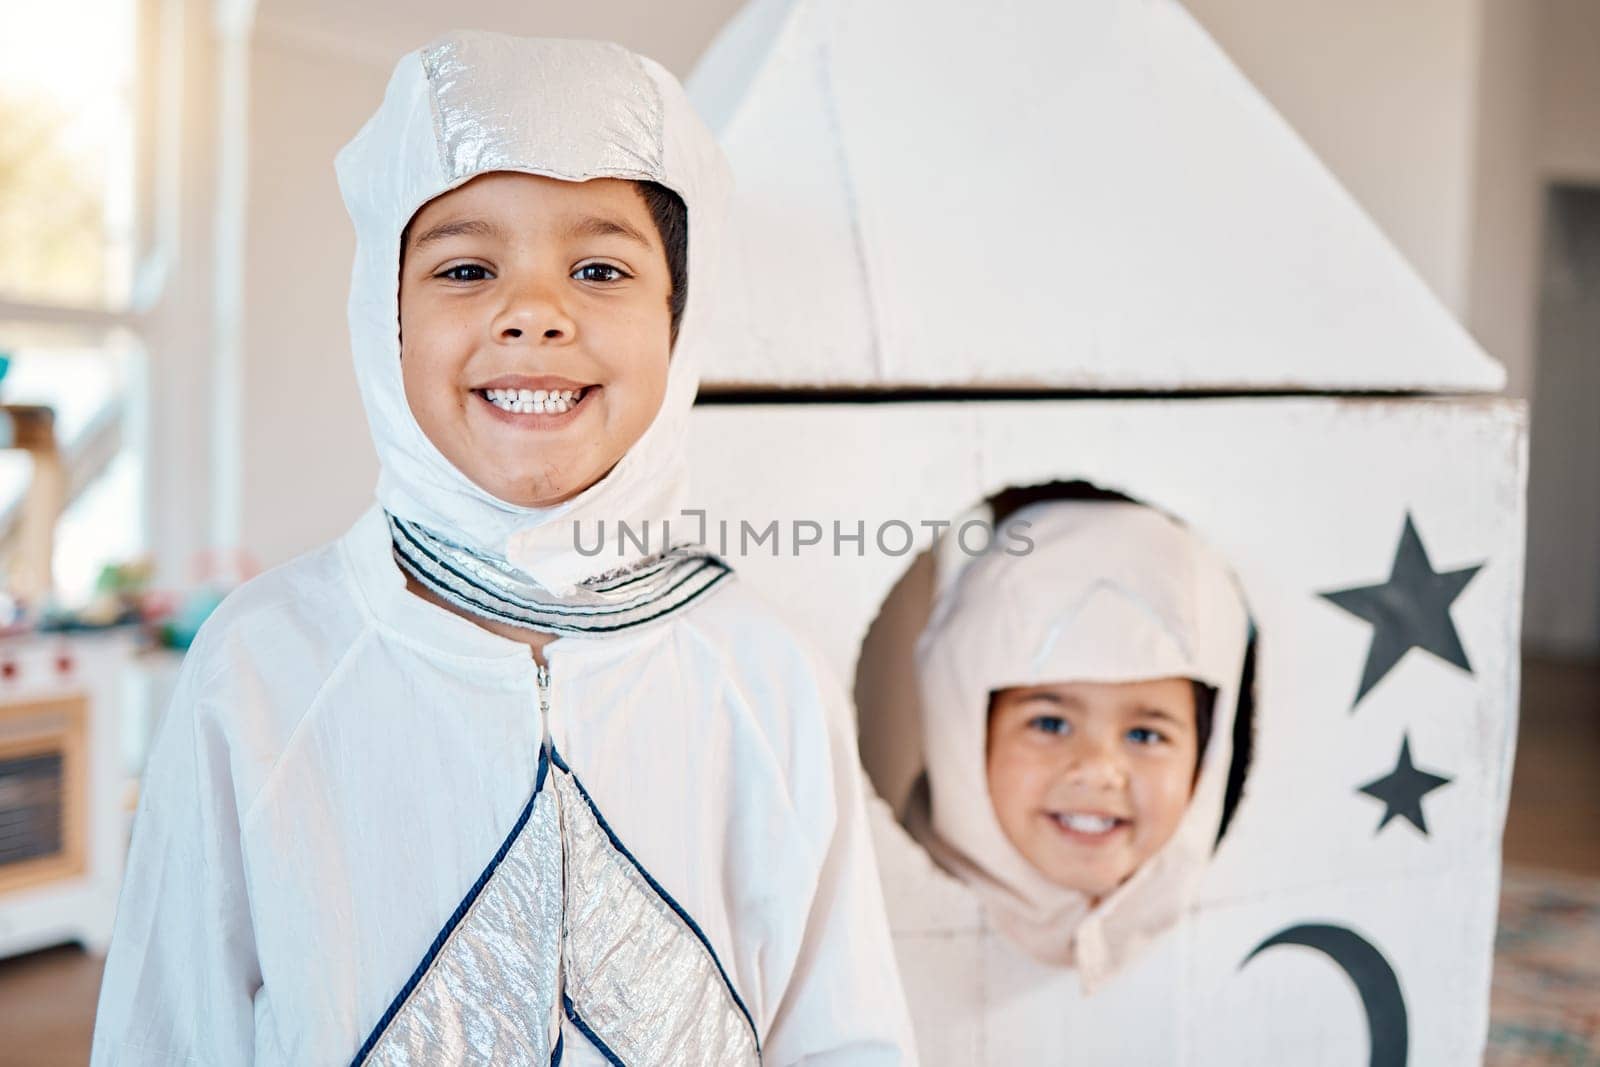 Astronaut portrait, spaceship and kids happy, creative and playing space travel, home fantasy games or pretend rocket. Explore flight, fun Halloween costume or young children imagine galaxy adventure.